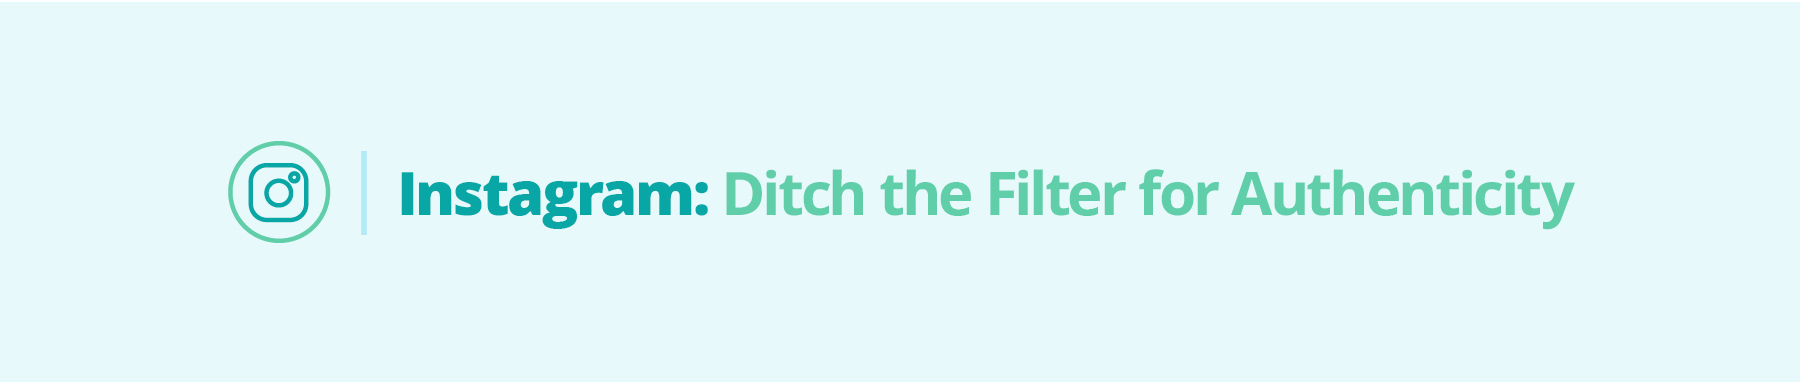 Instagram: Ditch the Filter for Authenticity